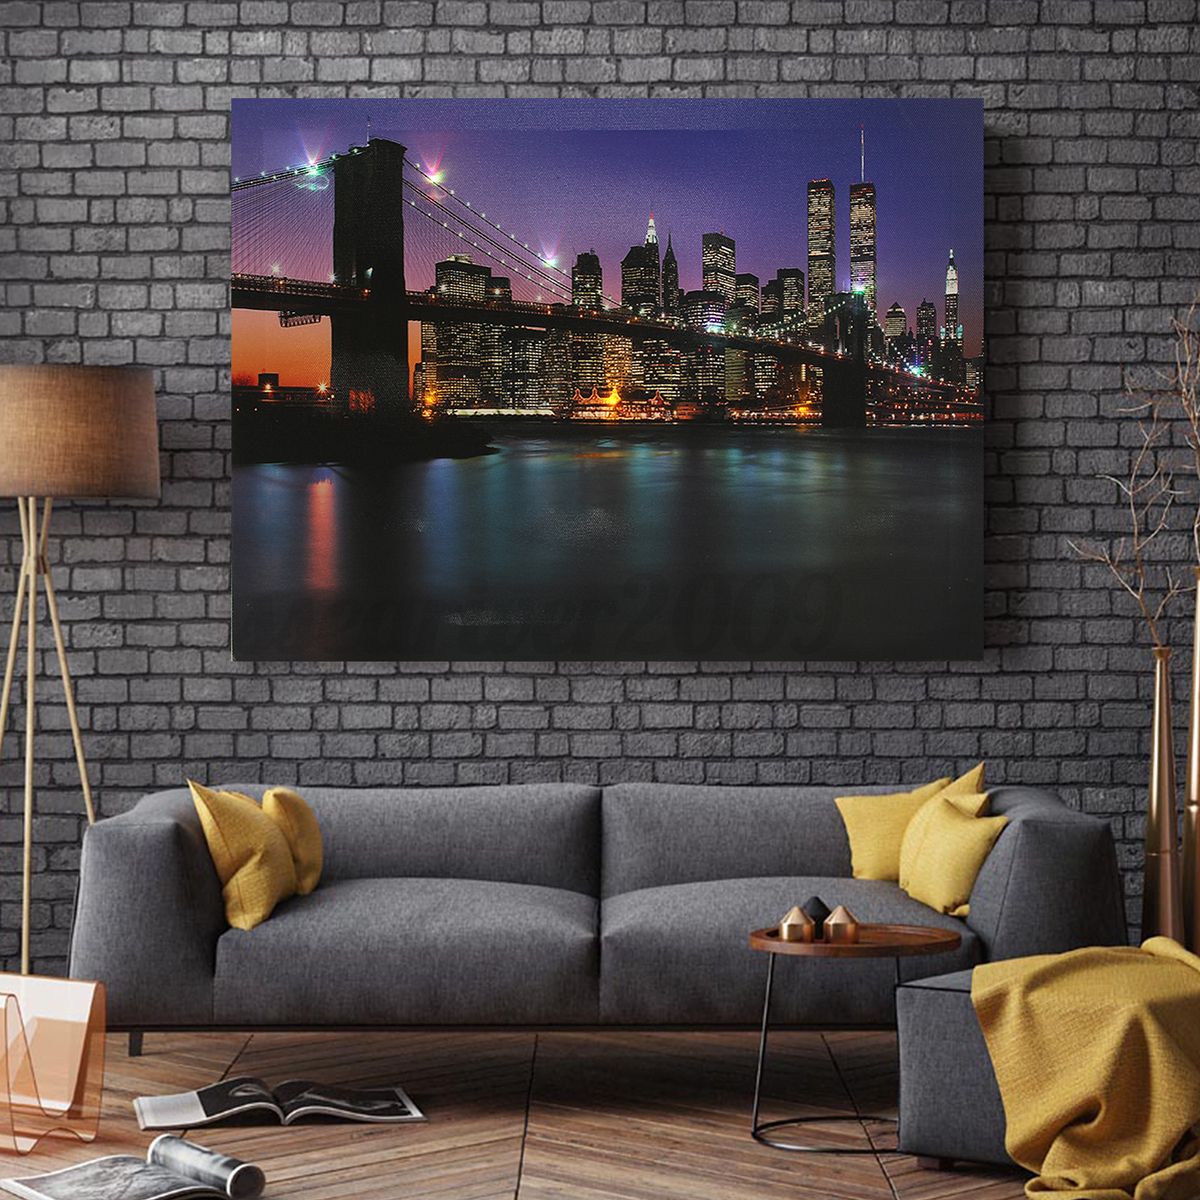 Bridge Led Light Up Canvas Painting Picture Wall Hanging Art Decor 12 With Most Recent Starlight Wall Art (View 9 of 20)